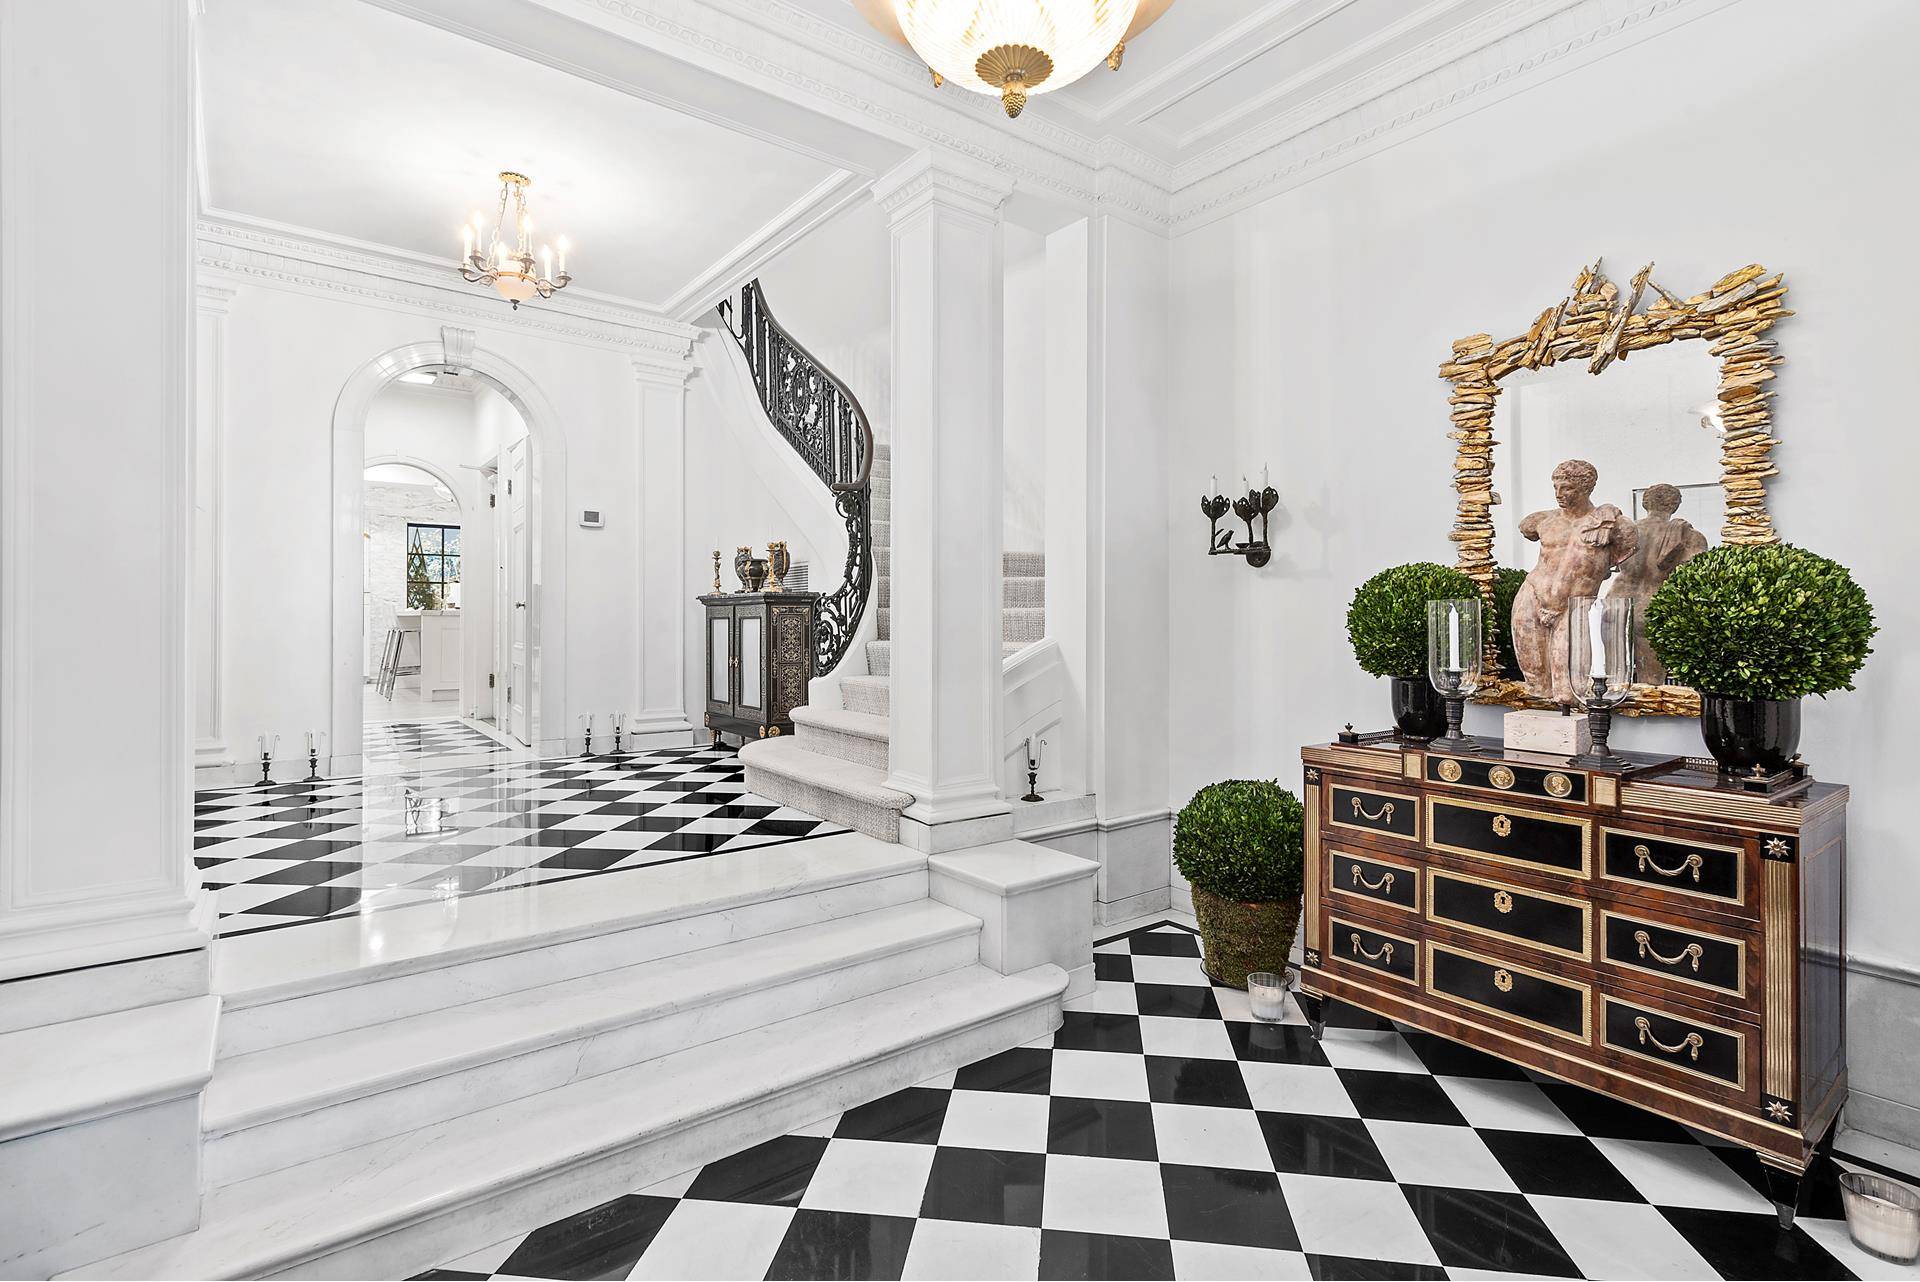 Reigning supreme, the ultimate Upper East Side mansionA striking neo Italian Renaissance facade, a beautiful palette of materials and artfully conceived interiors create a bold statement in this imposing 7 ...